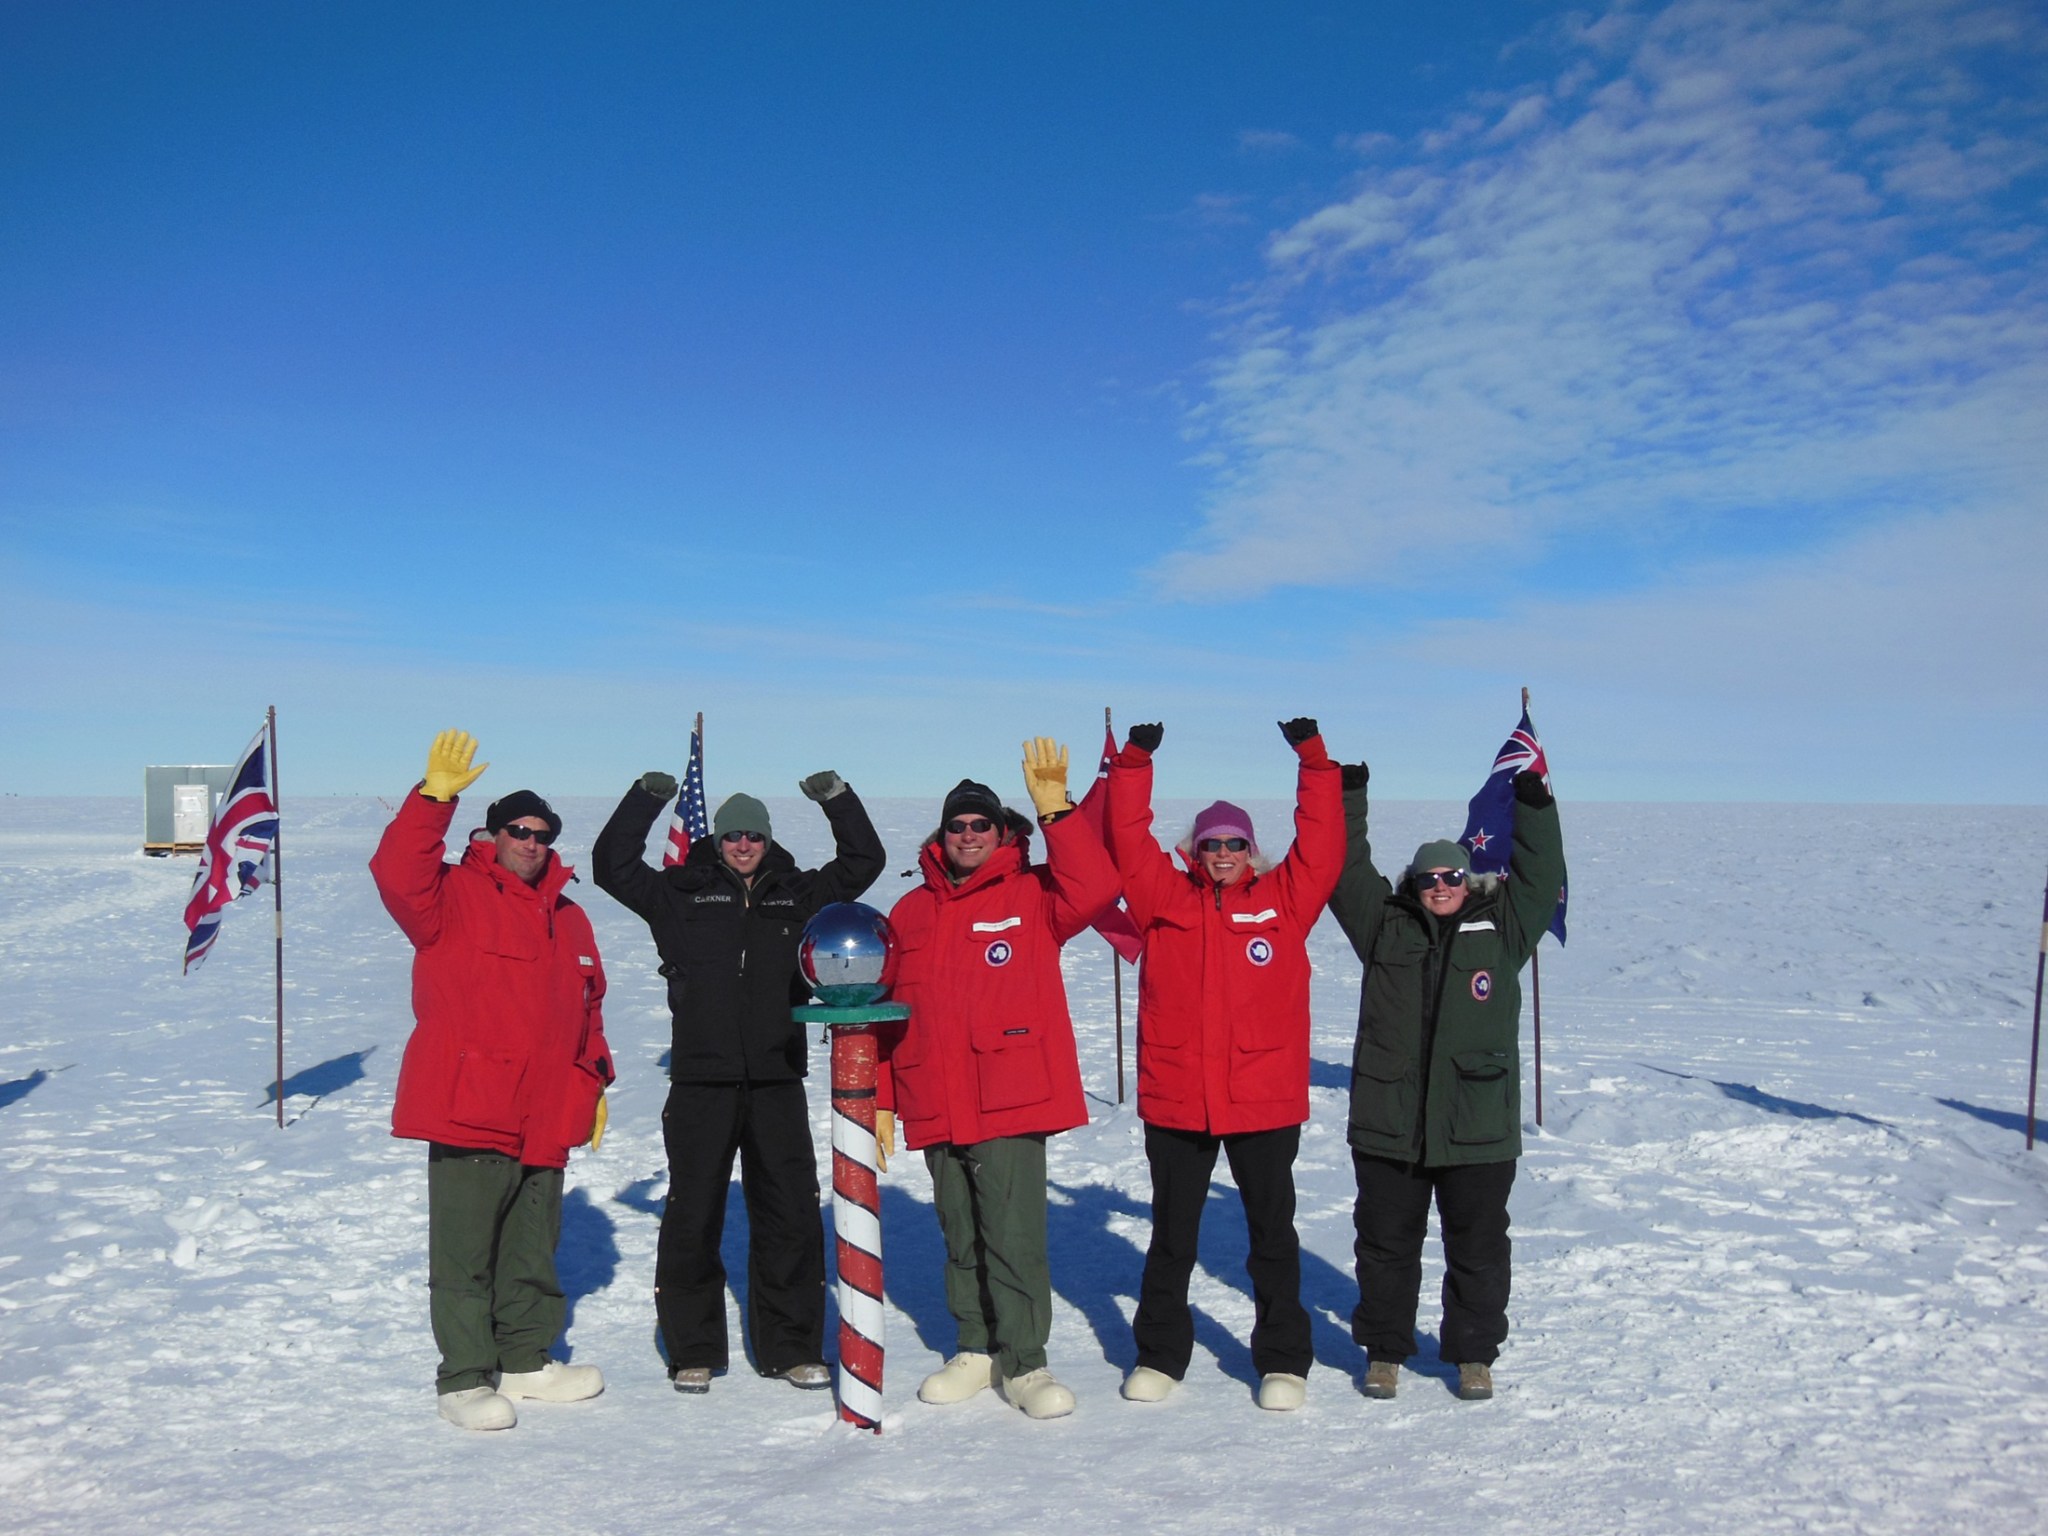 Five people dressed in cold weather gear stand outside in the snow behind a red and white pole marking the South Pole